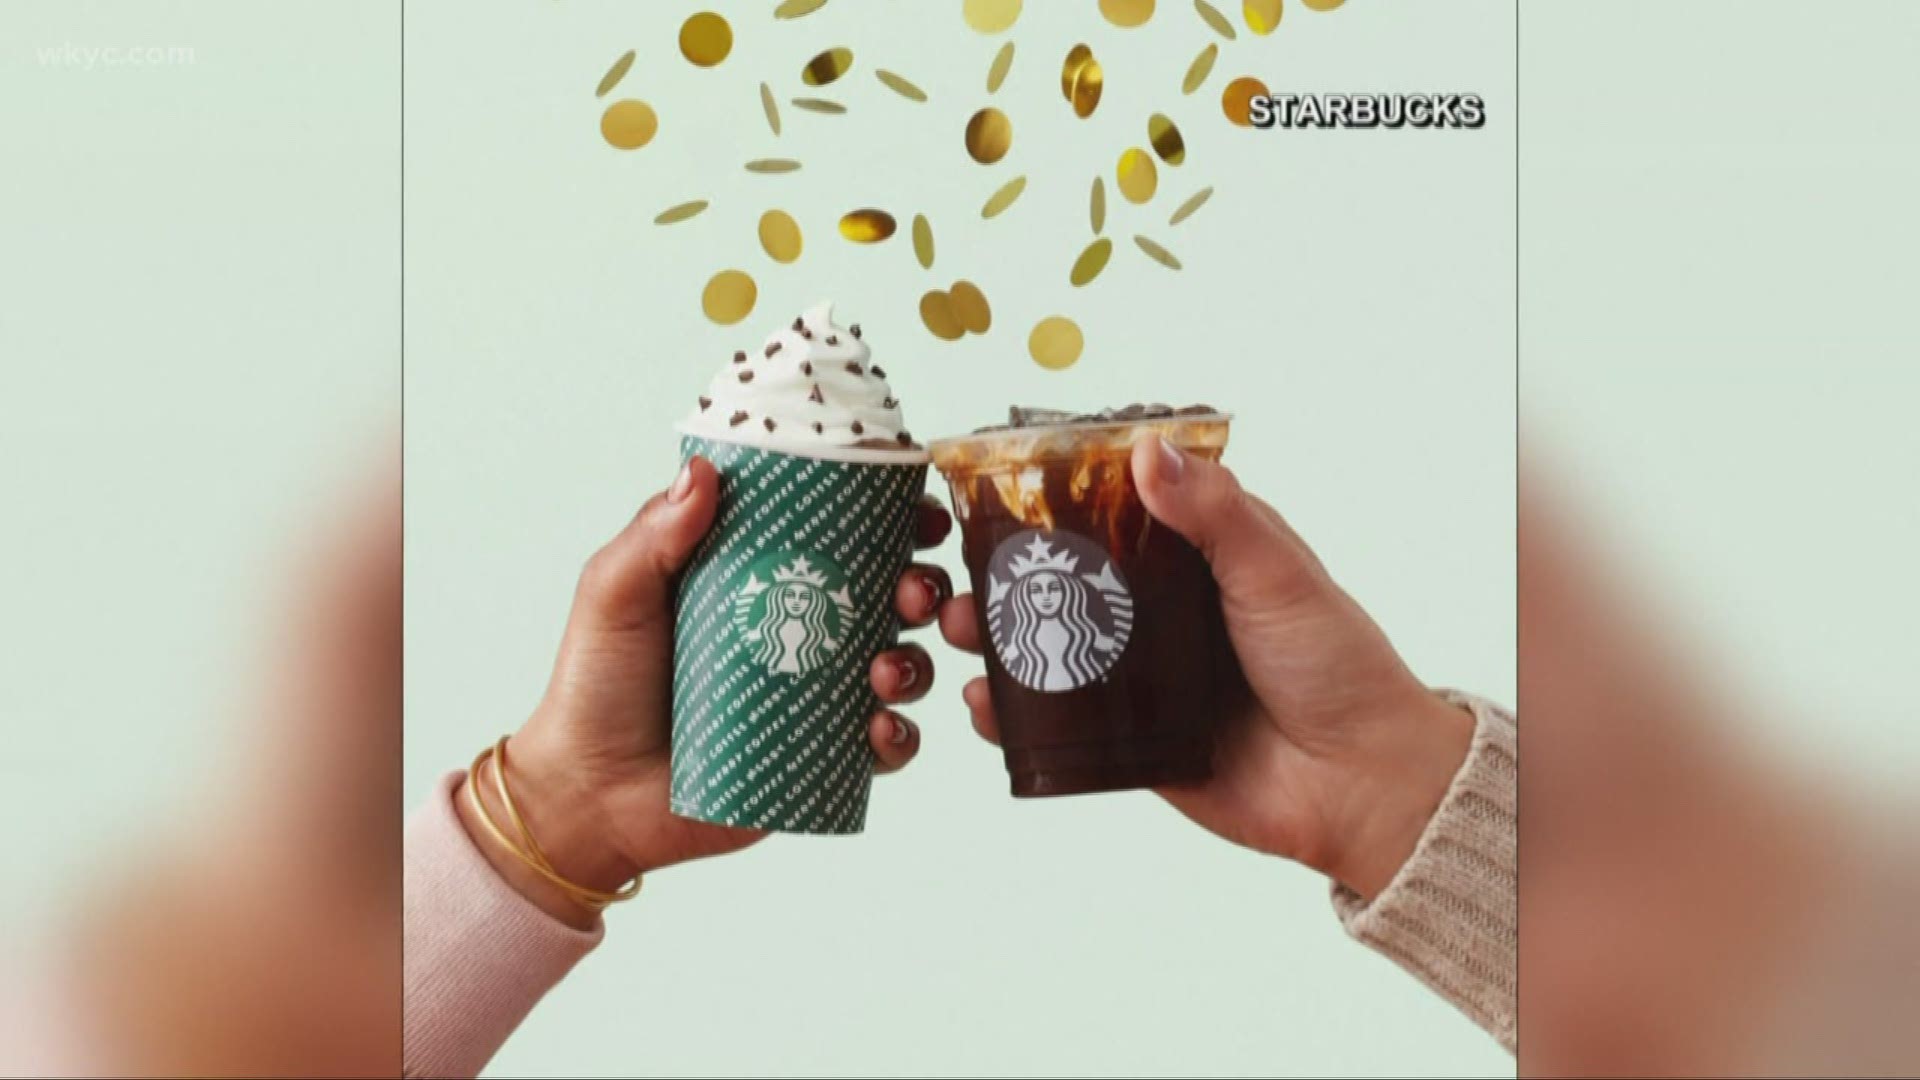 Holidays have you drained? Don't worry, Starbucks is set to host surprise pop-up parties to give out free coffee.